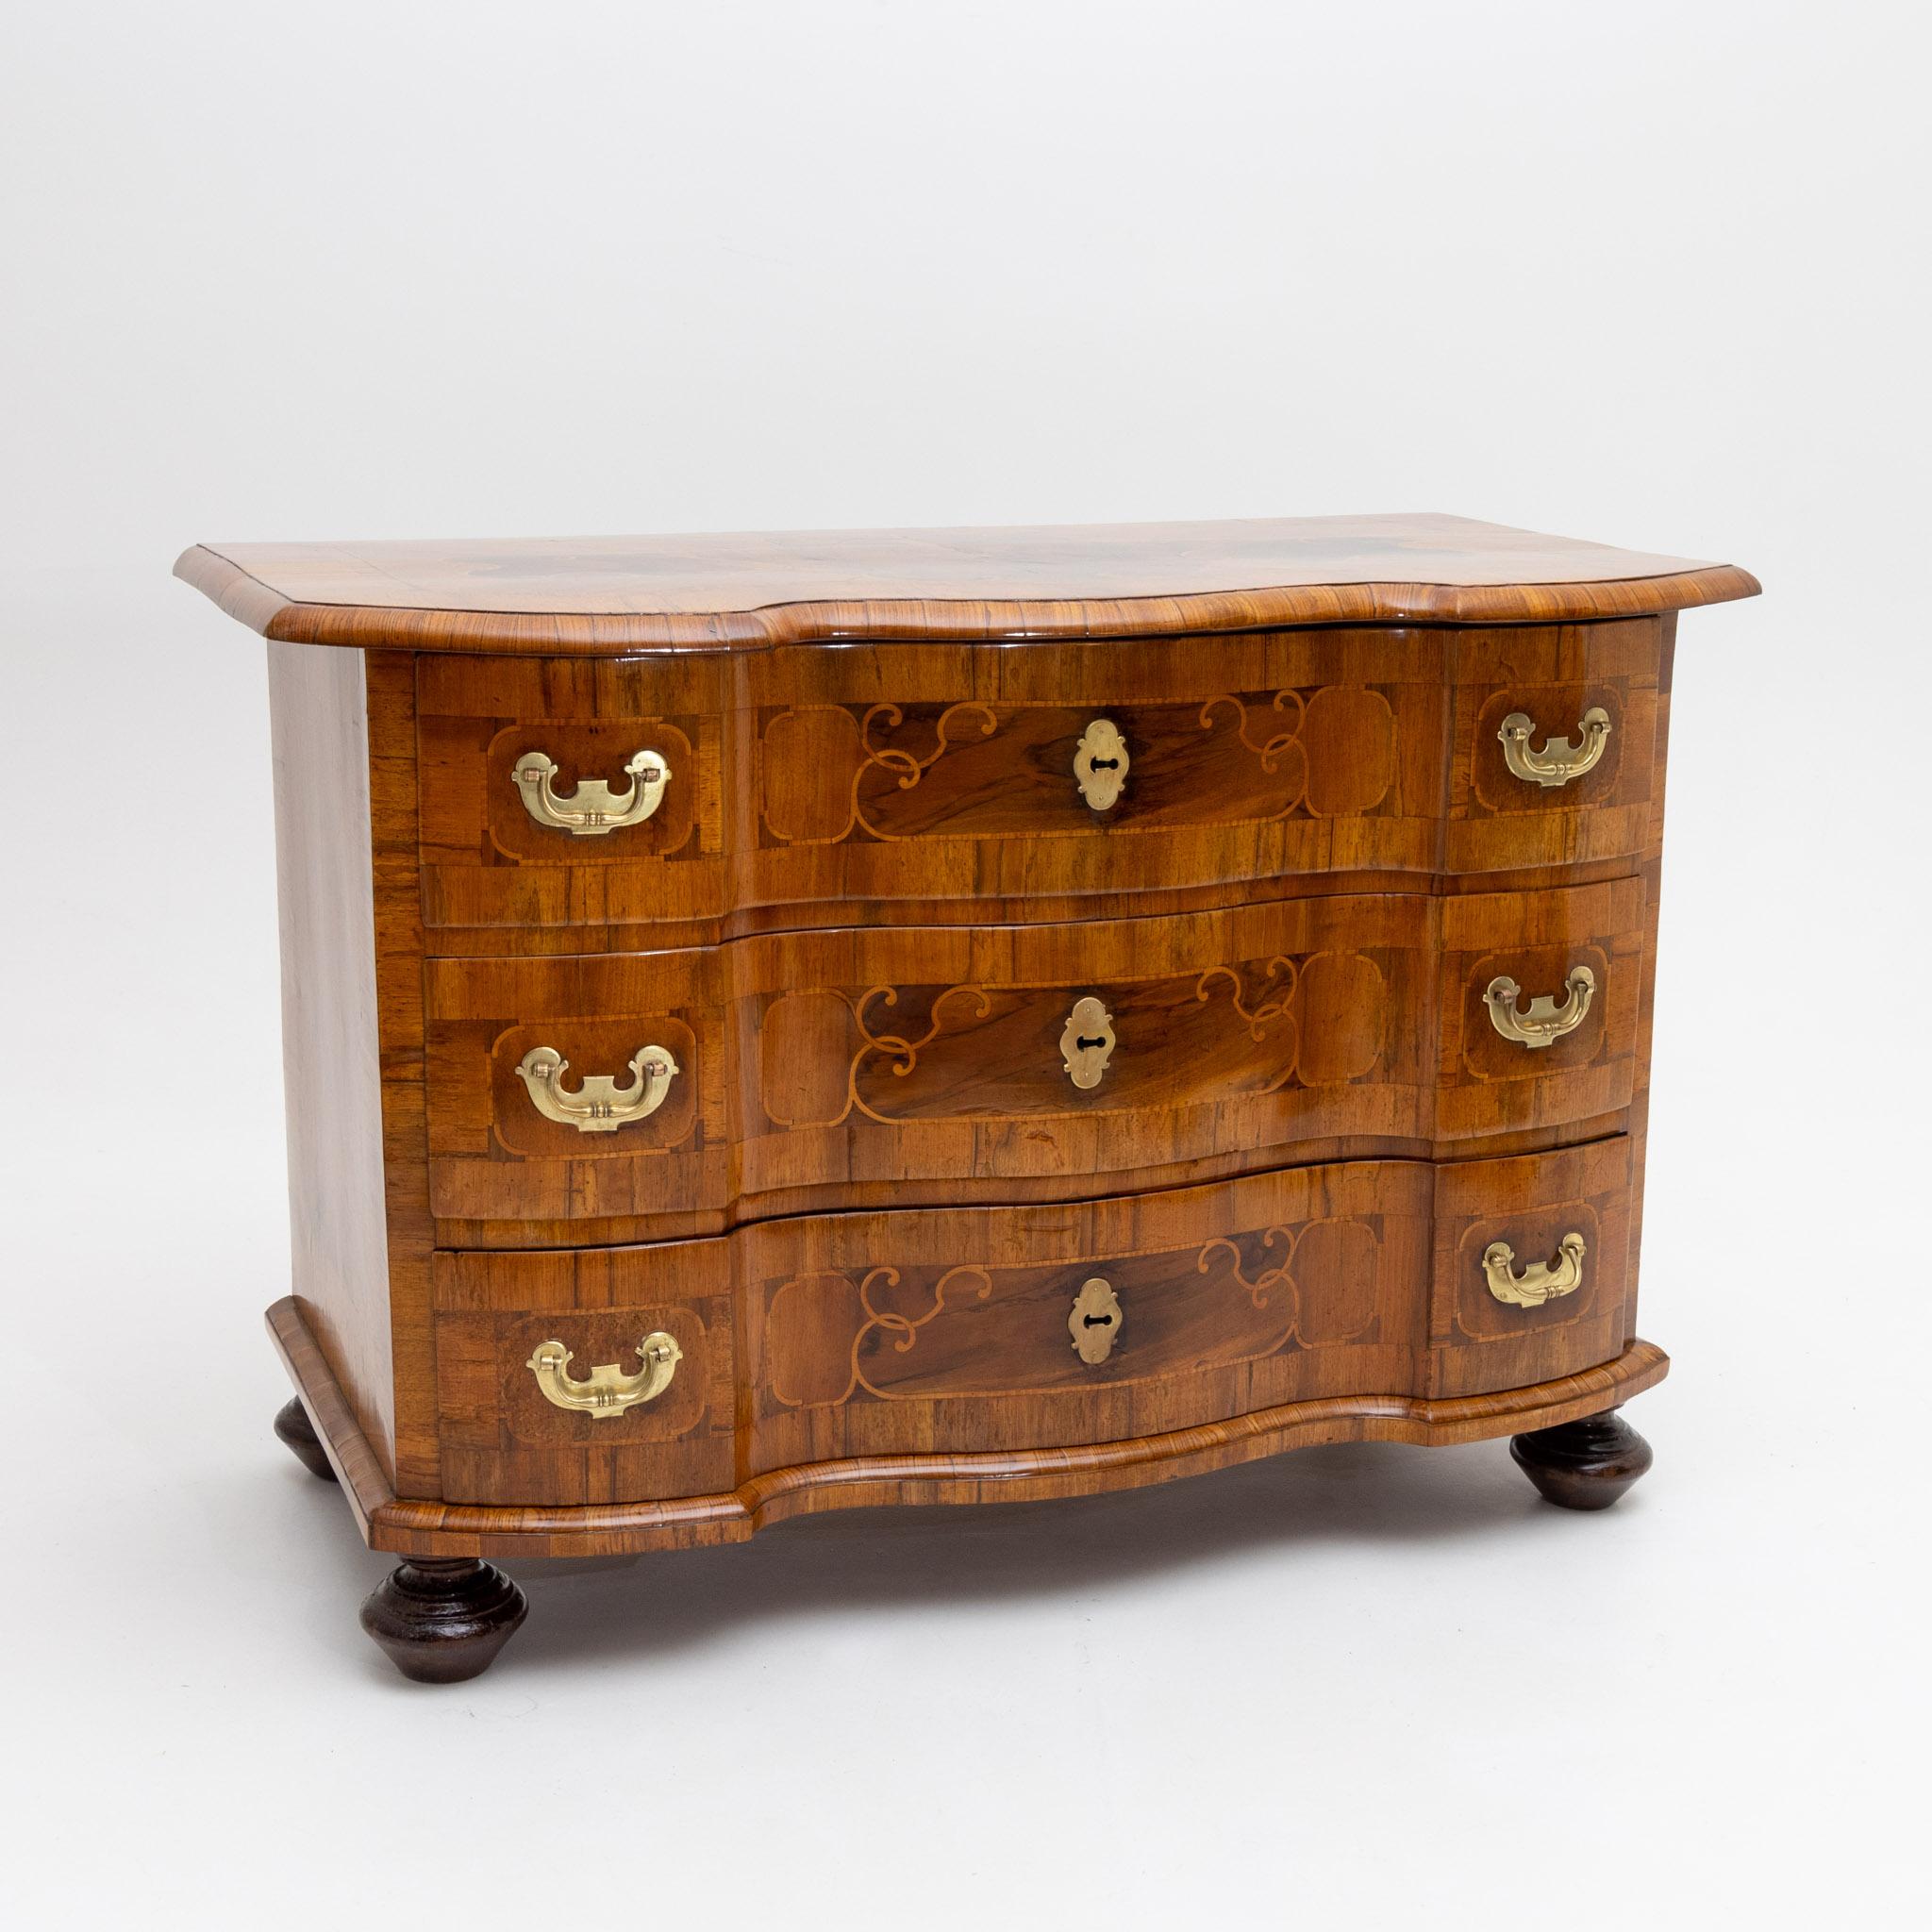 Three-drawer baroque chest of drawers in walnut veneer with ribbon inlays and baluster feet. The chest of drawers is in a restored and hand-polished condition.